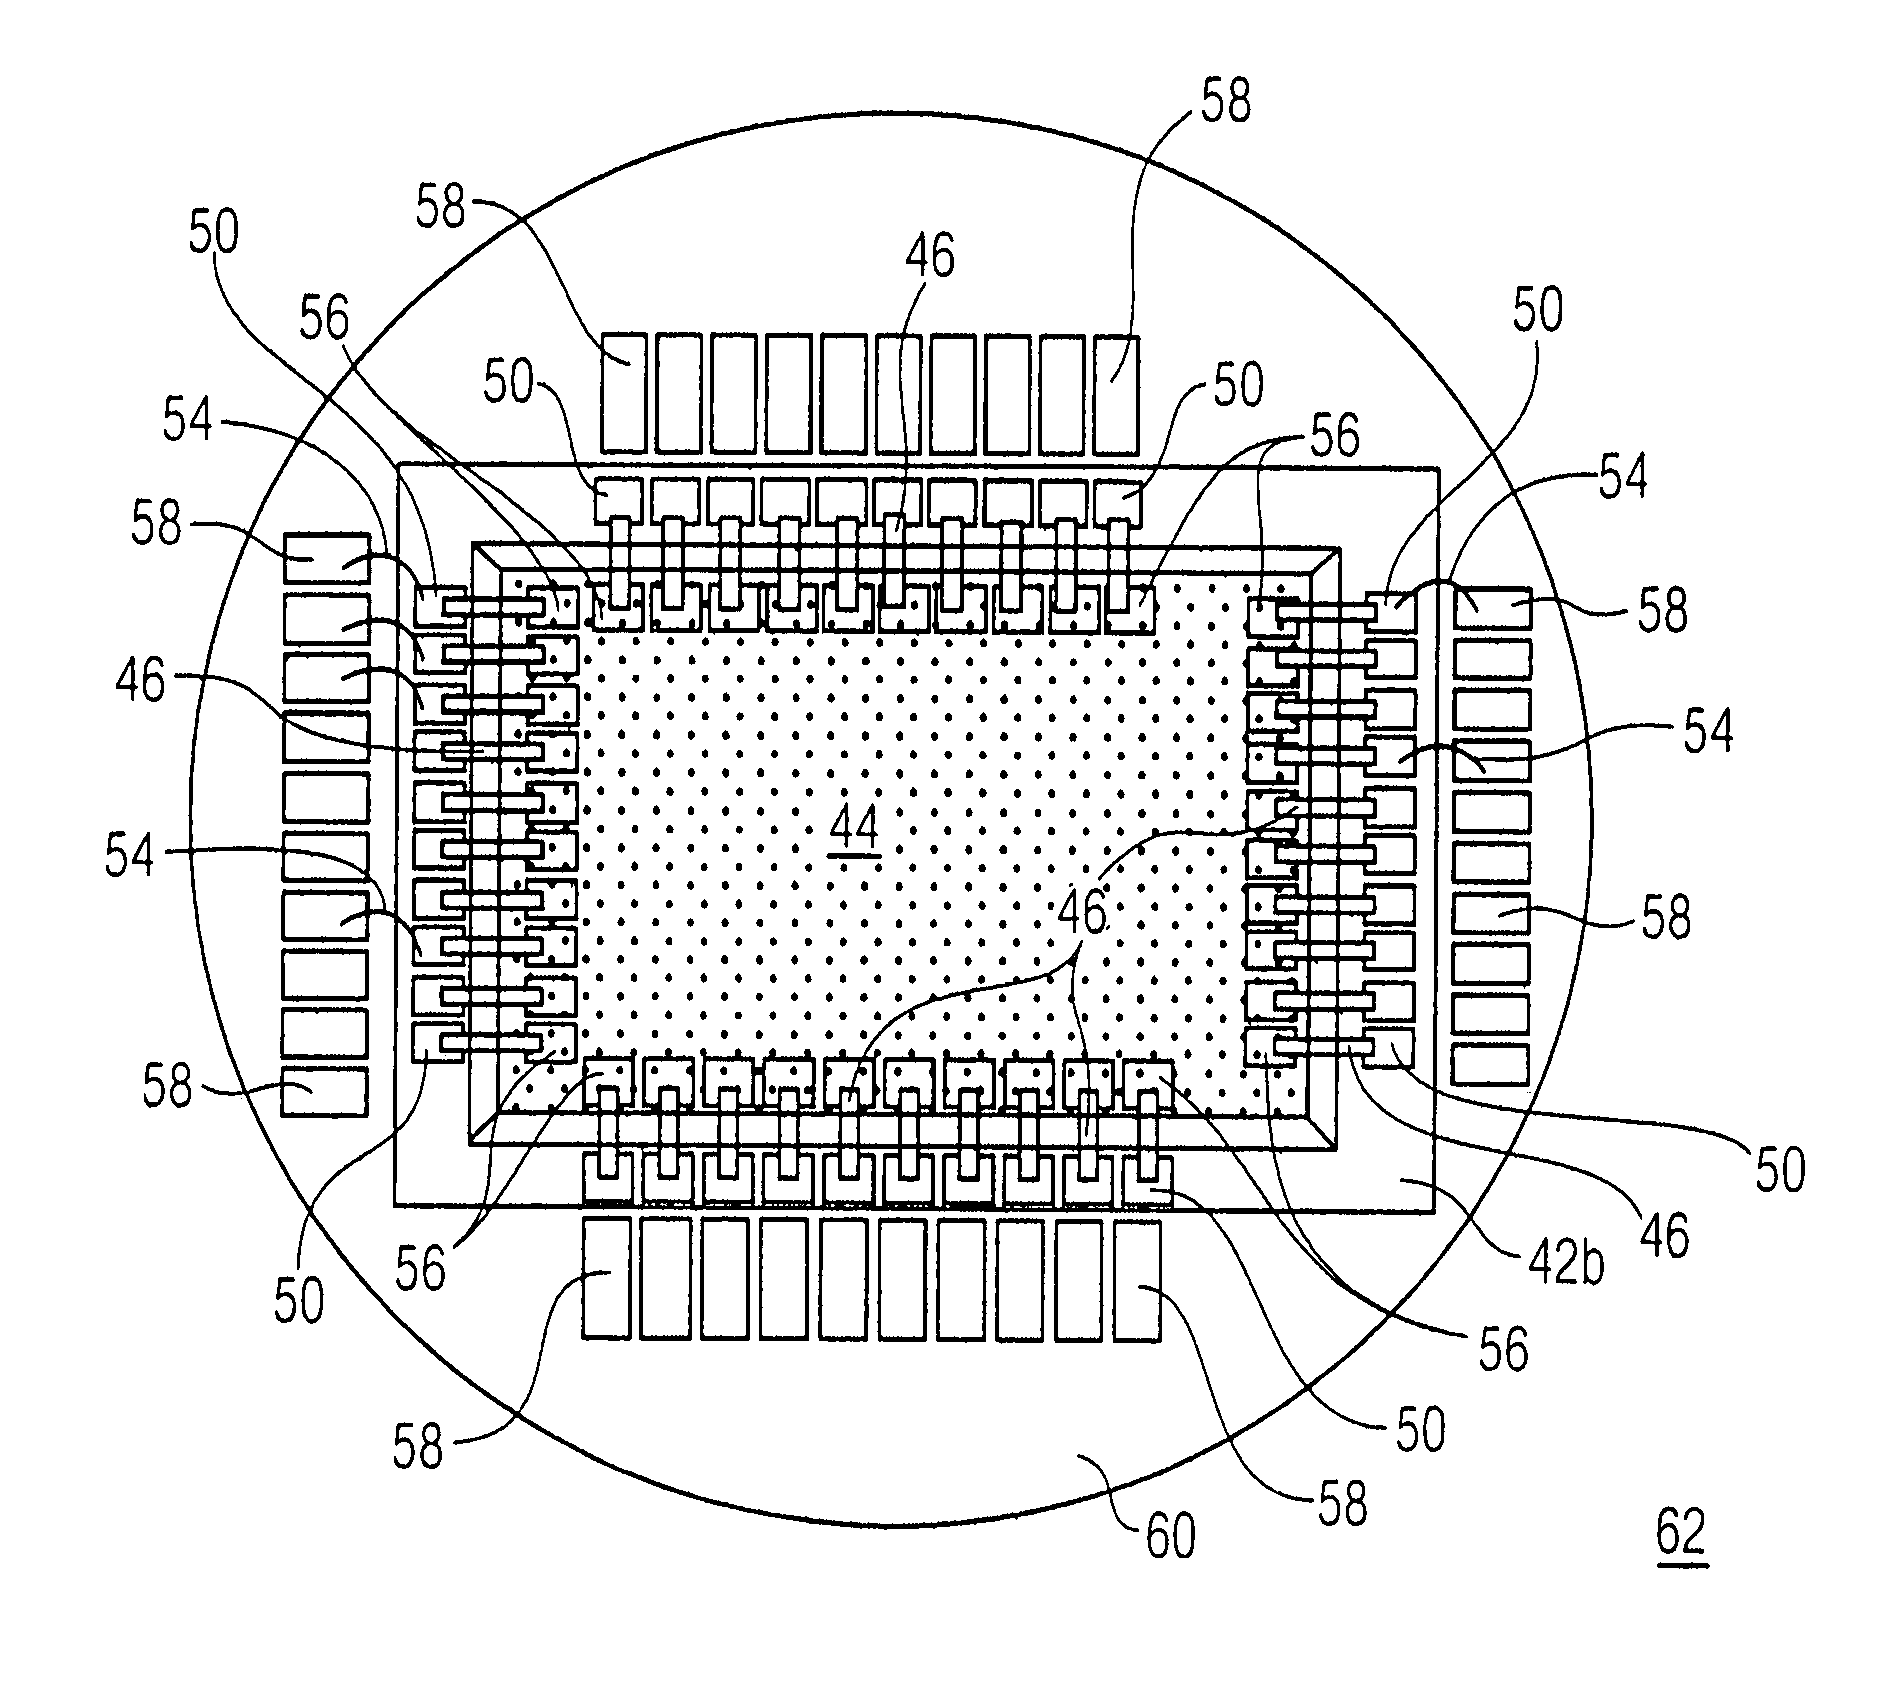 Low profile wire bond for an electron sensing device in an image intensifier tube